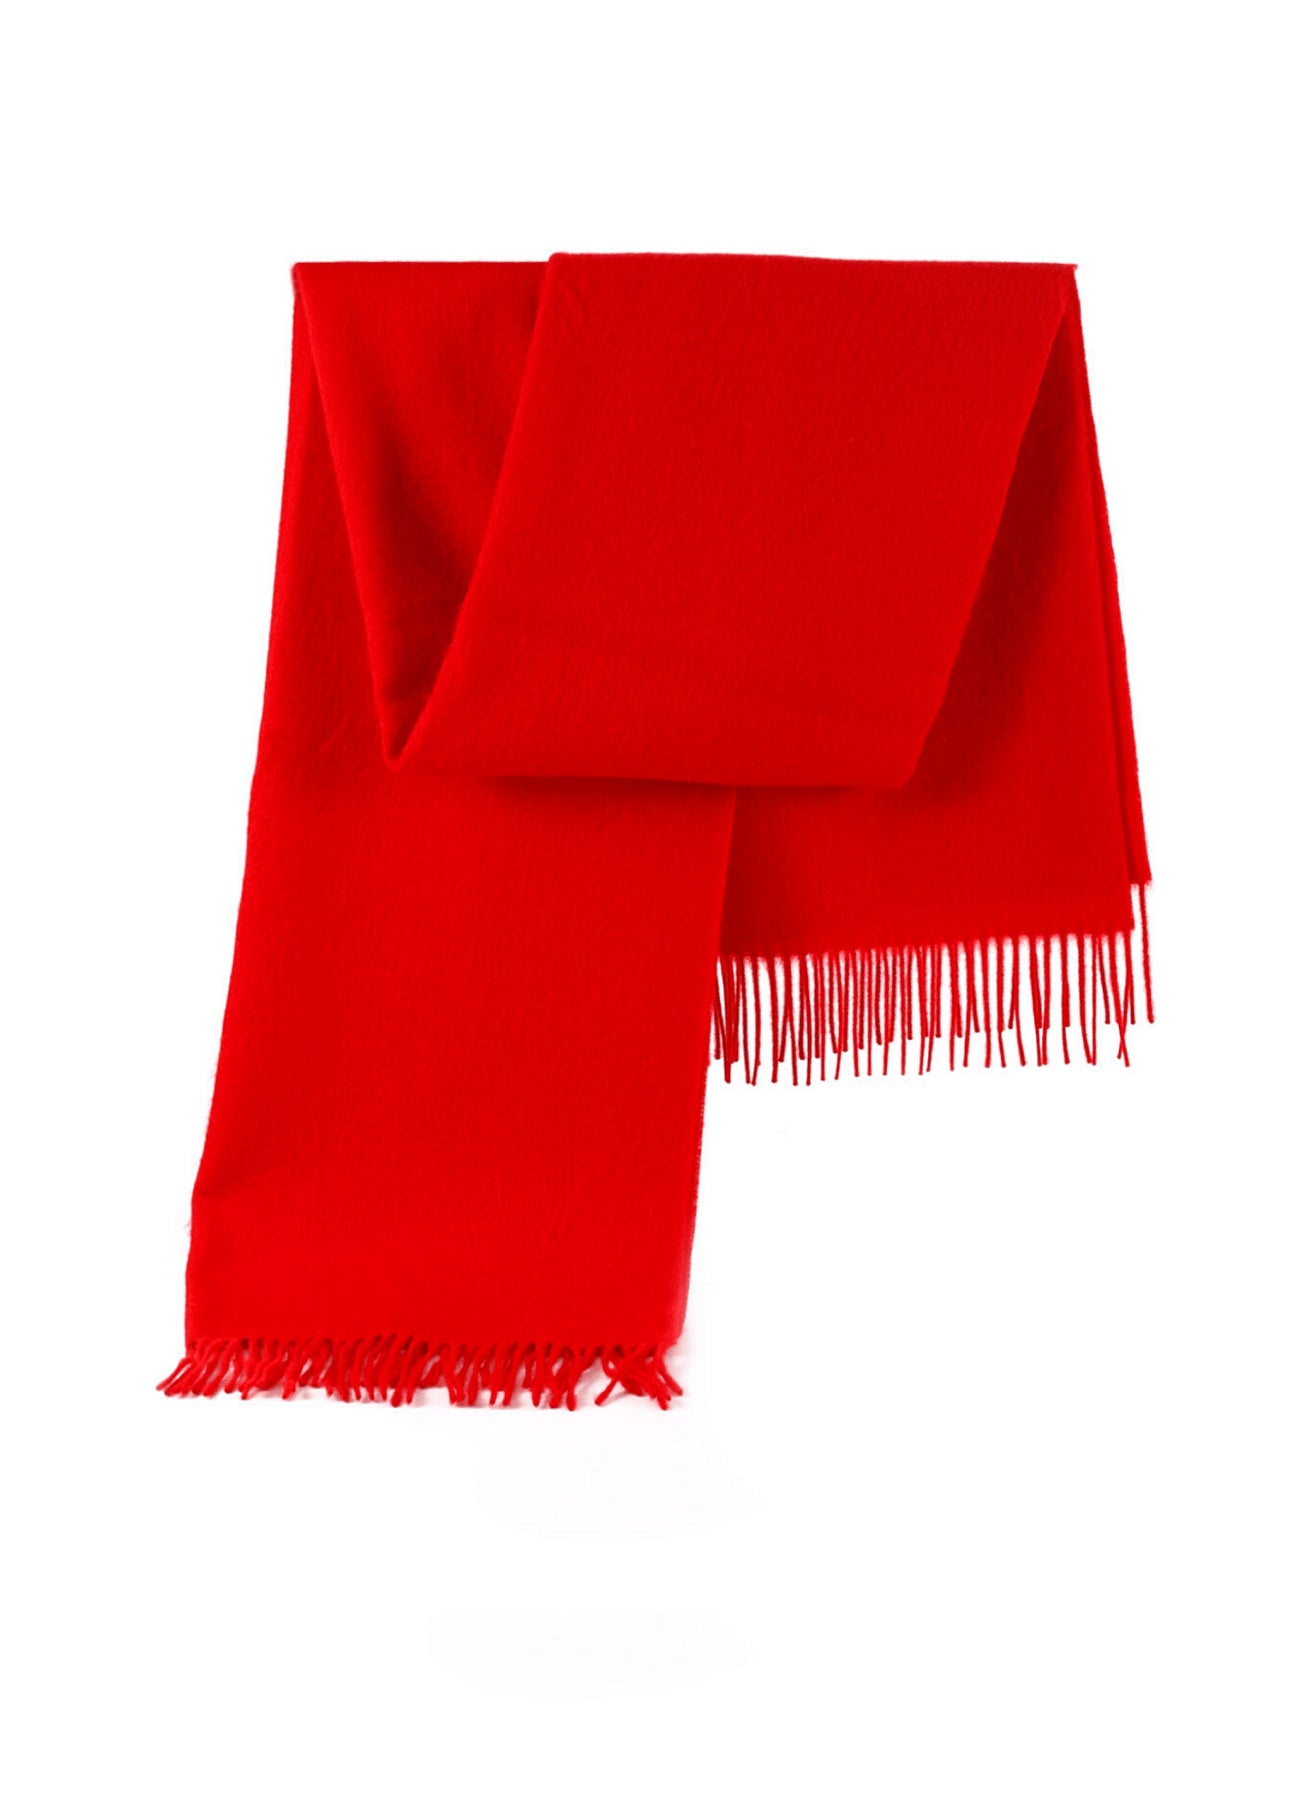 Plain Red Blanket 100% Pure Lambswool